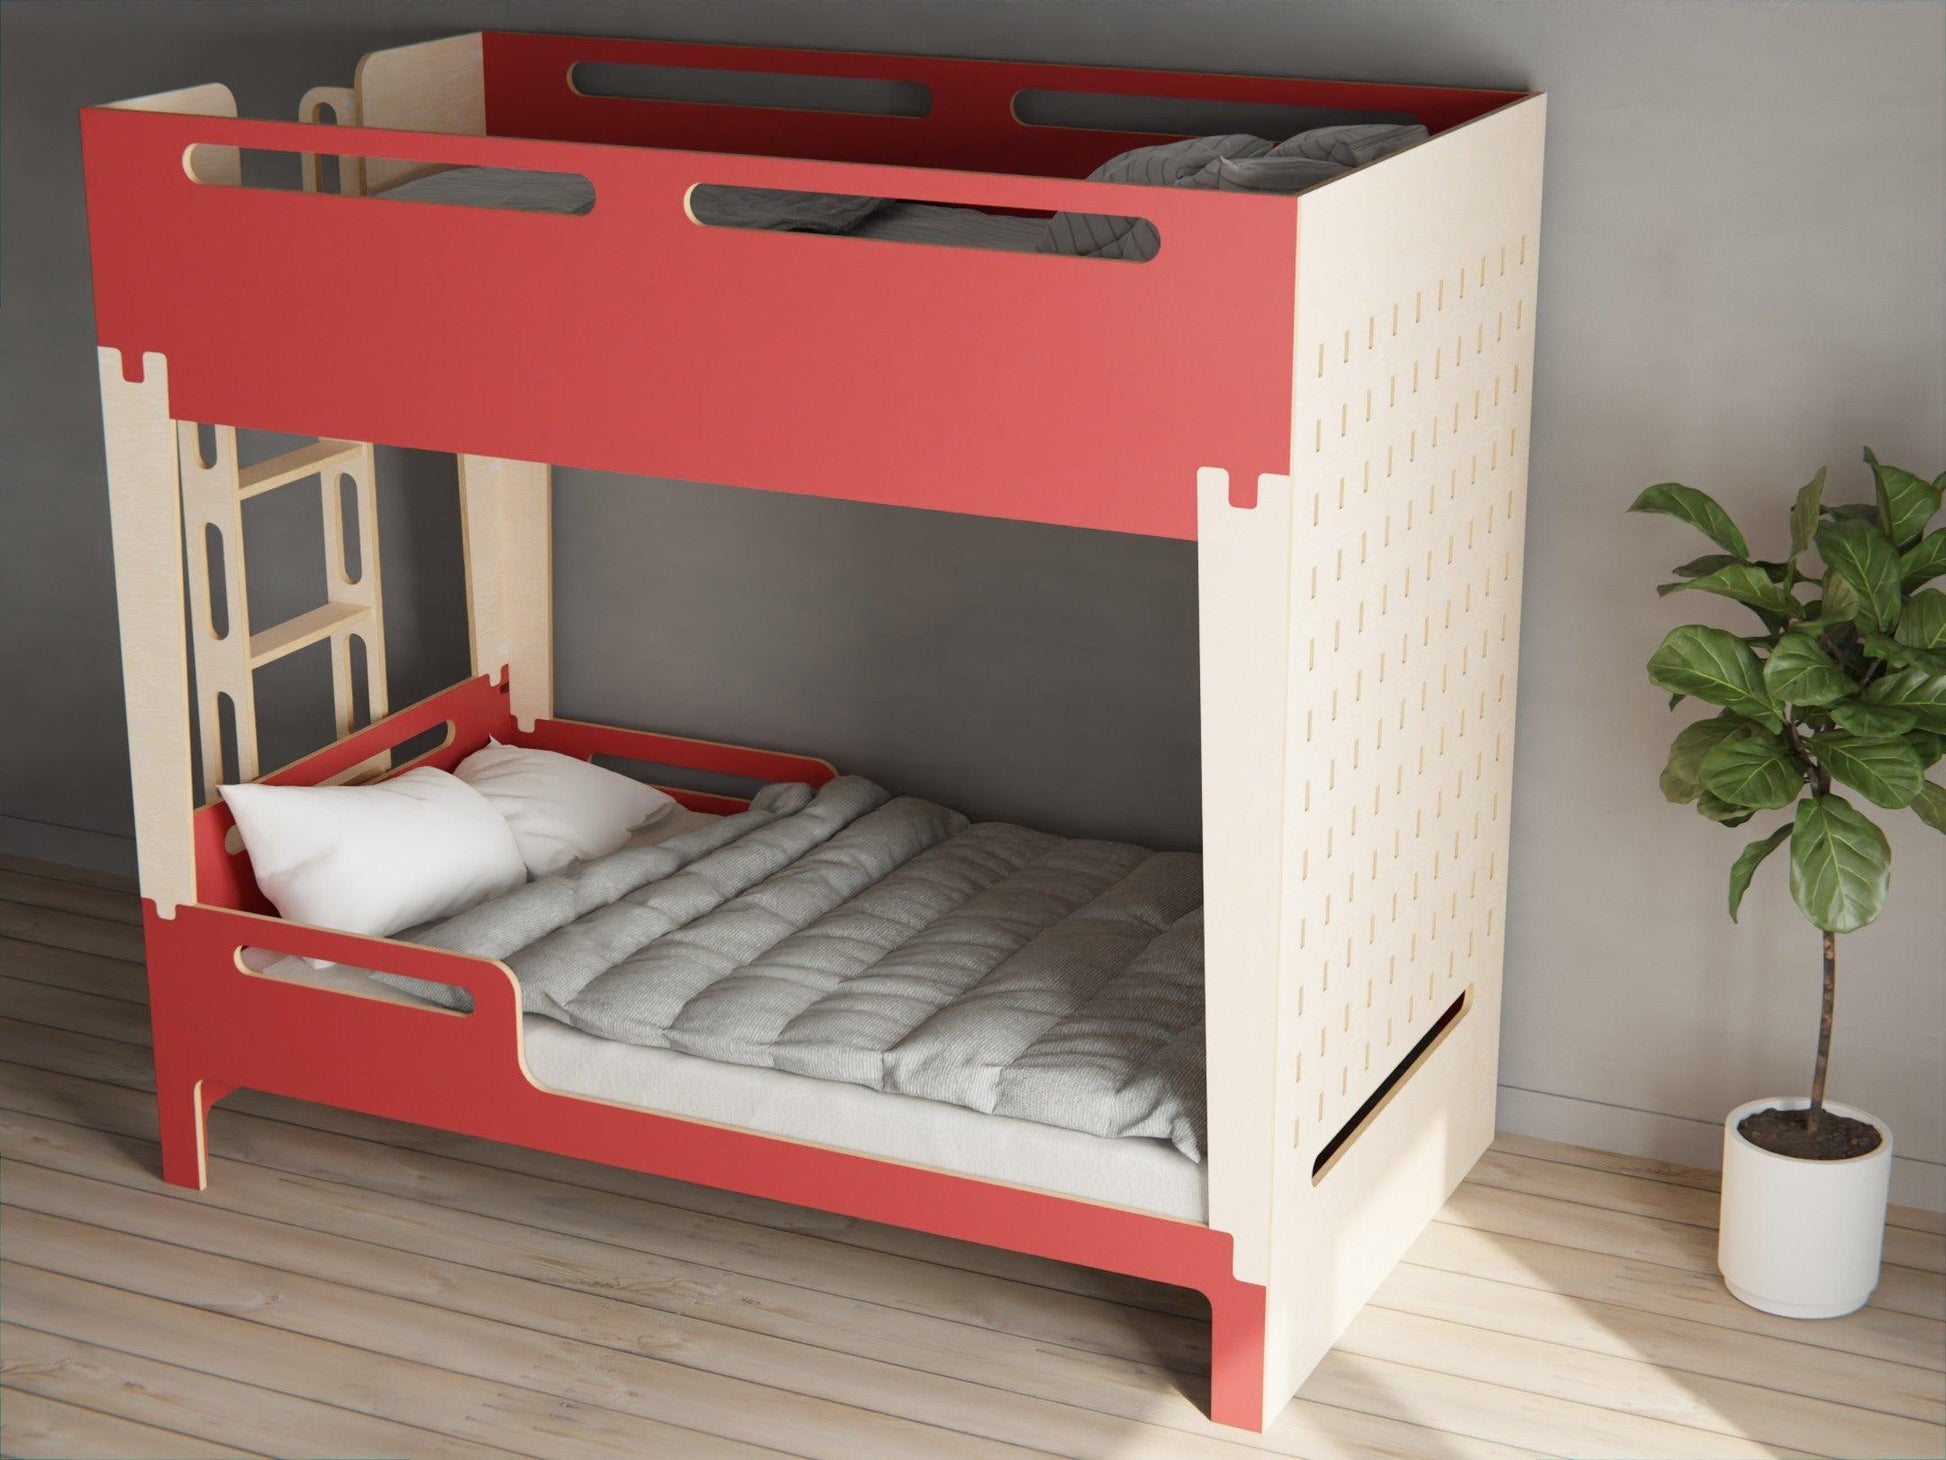 Chic, functional elevated beds in Scandinavian-style. Made from plywood in rd colour.